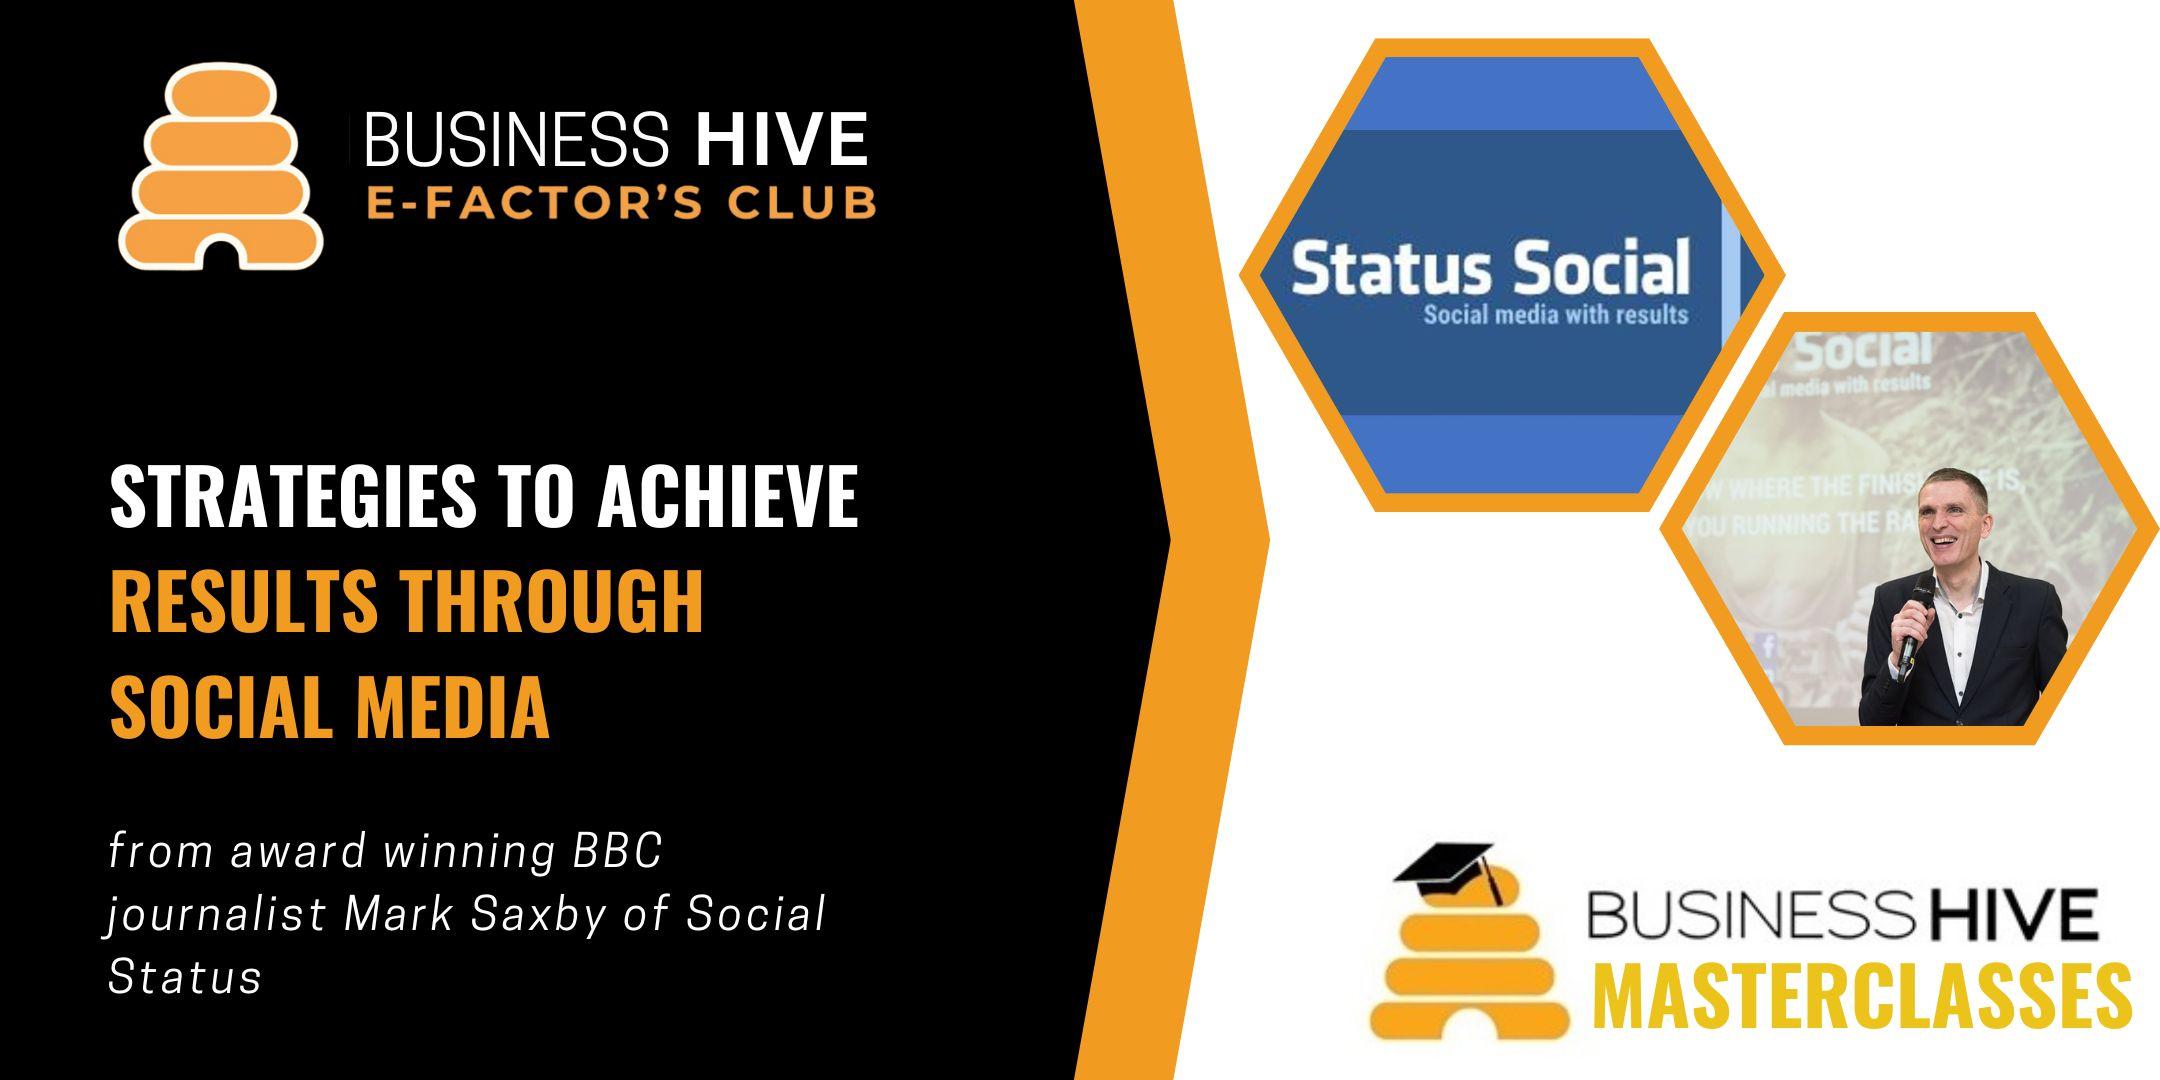 Business hive utilizes social media strategies to achieve results through masterclasses.